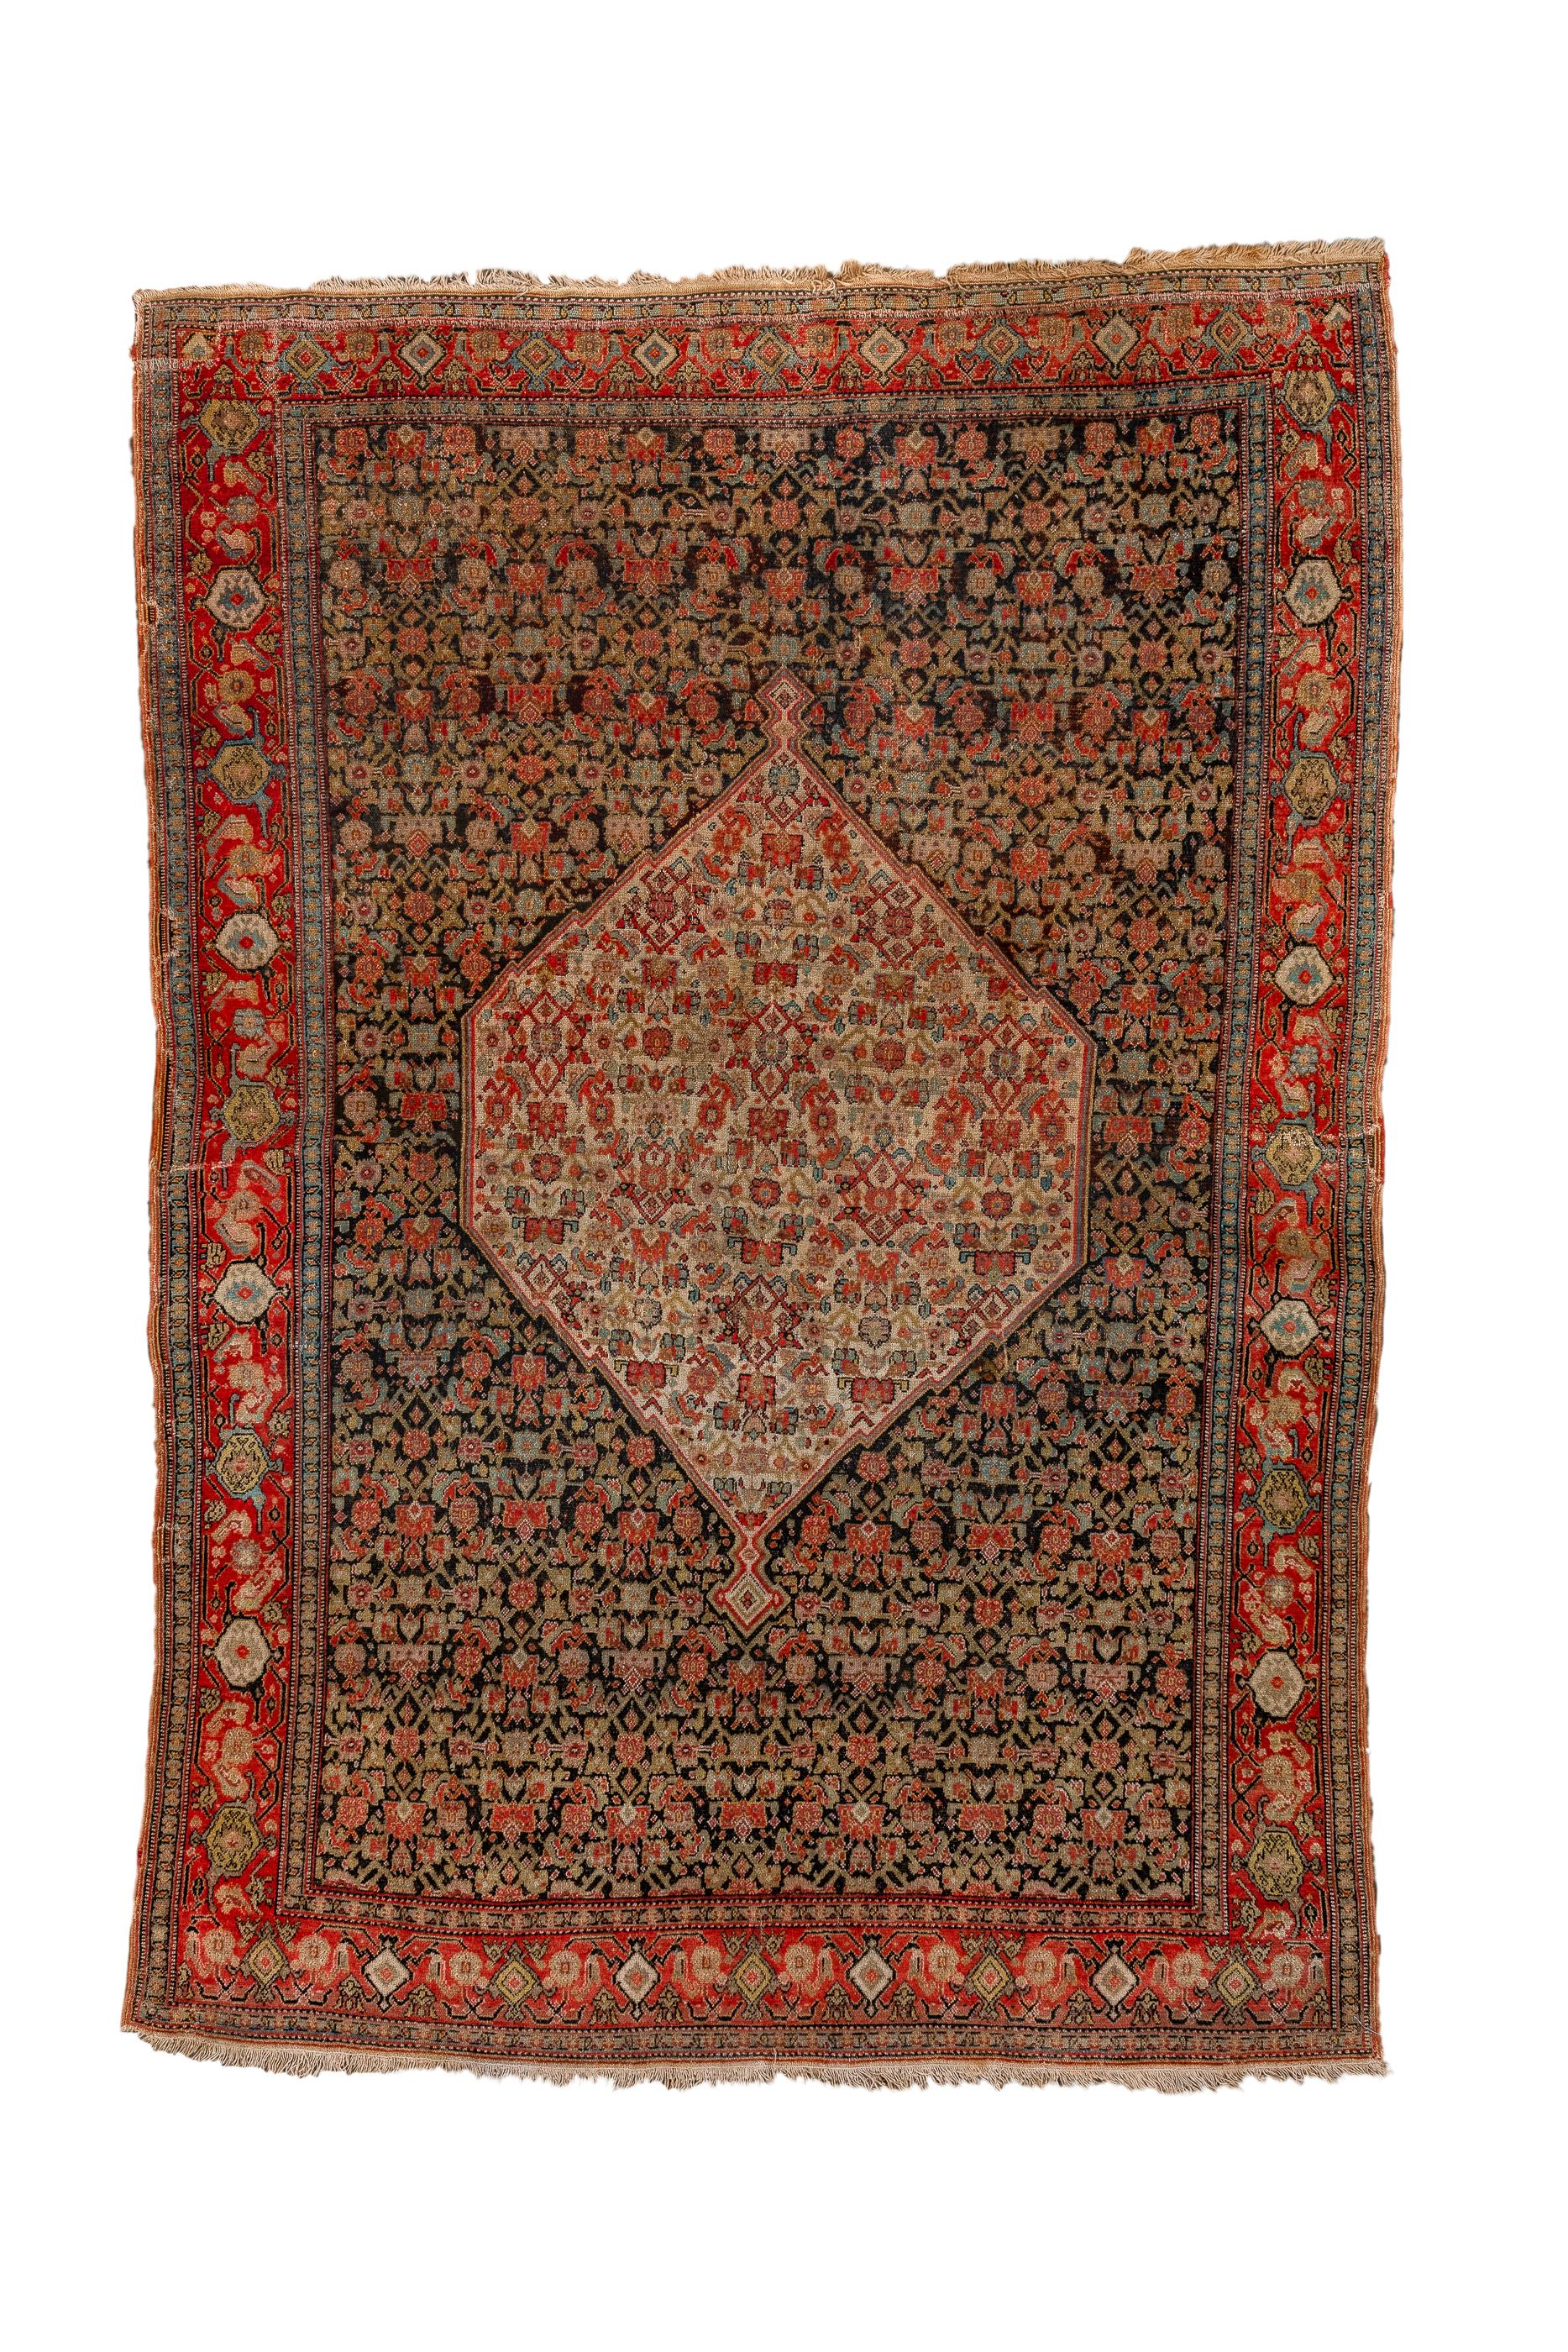 A single wafted, cotton foundation Kurdish city scatter with the characteristic sandpaper texture, and a small scale Herati pattern in both the bear black field and the ecru central medallion. Red main border with wonky reversing turtles. Fine